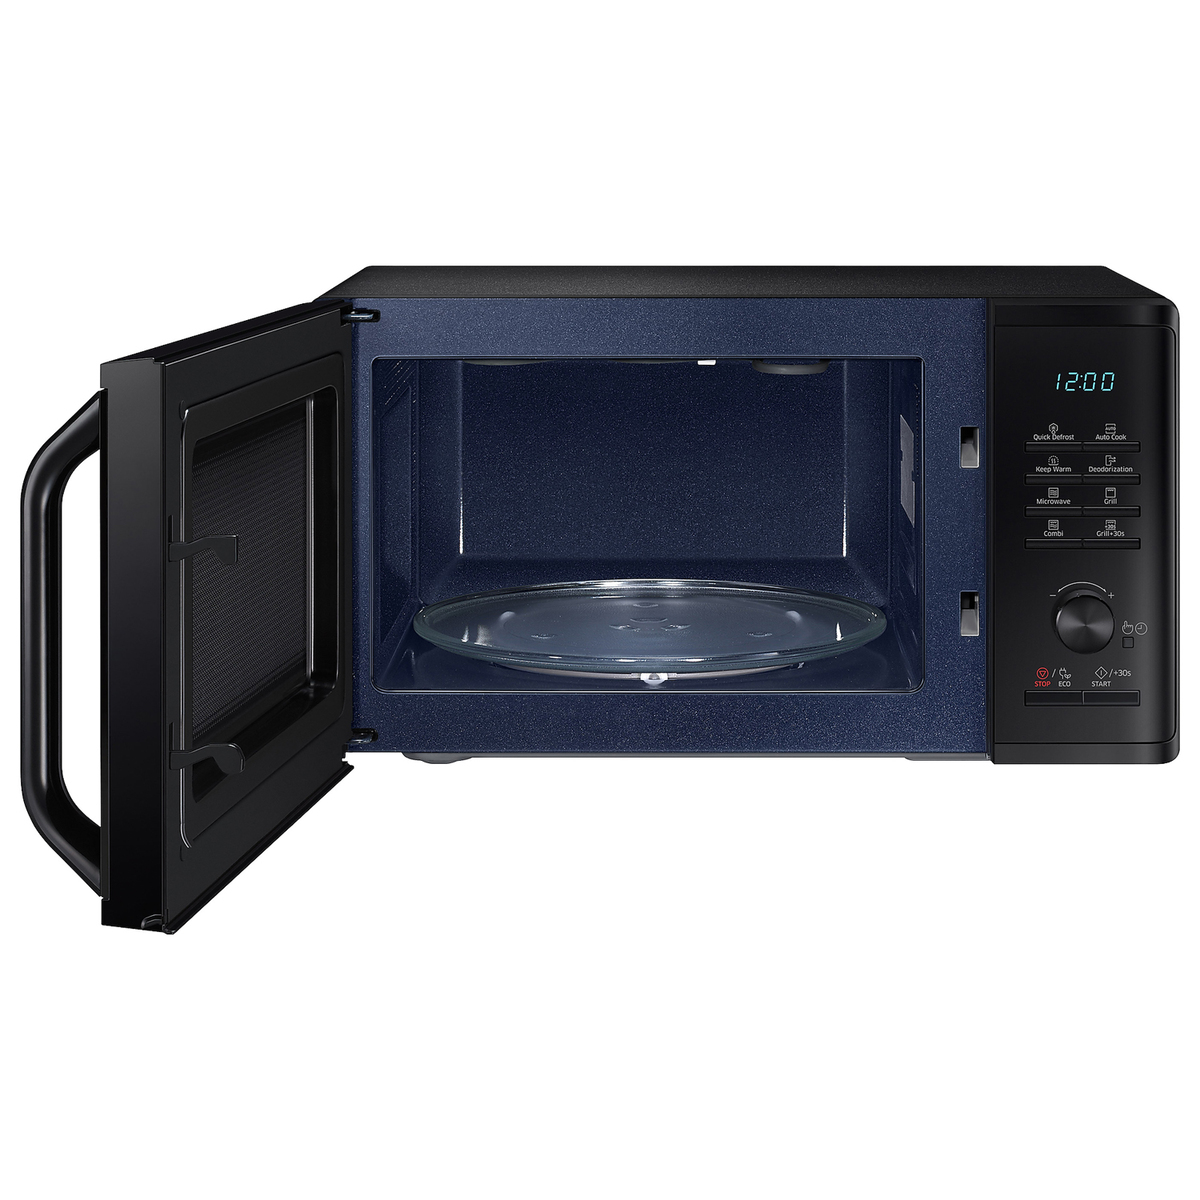 Samsung MG23A3515AK Grill Microwave Oven 23 Litre